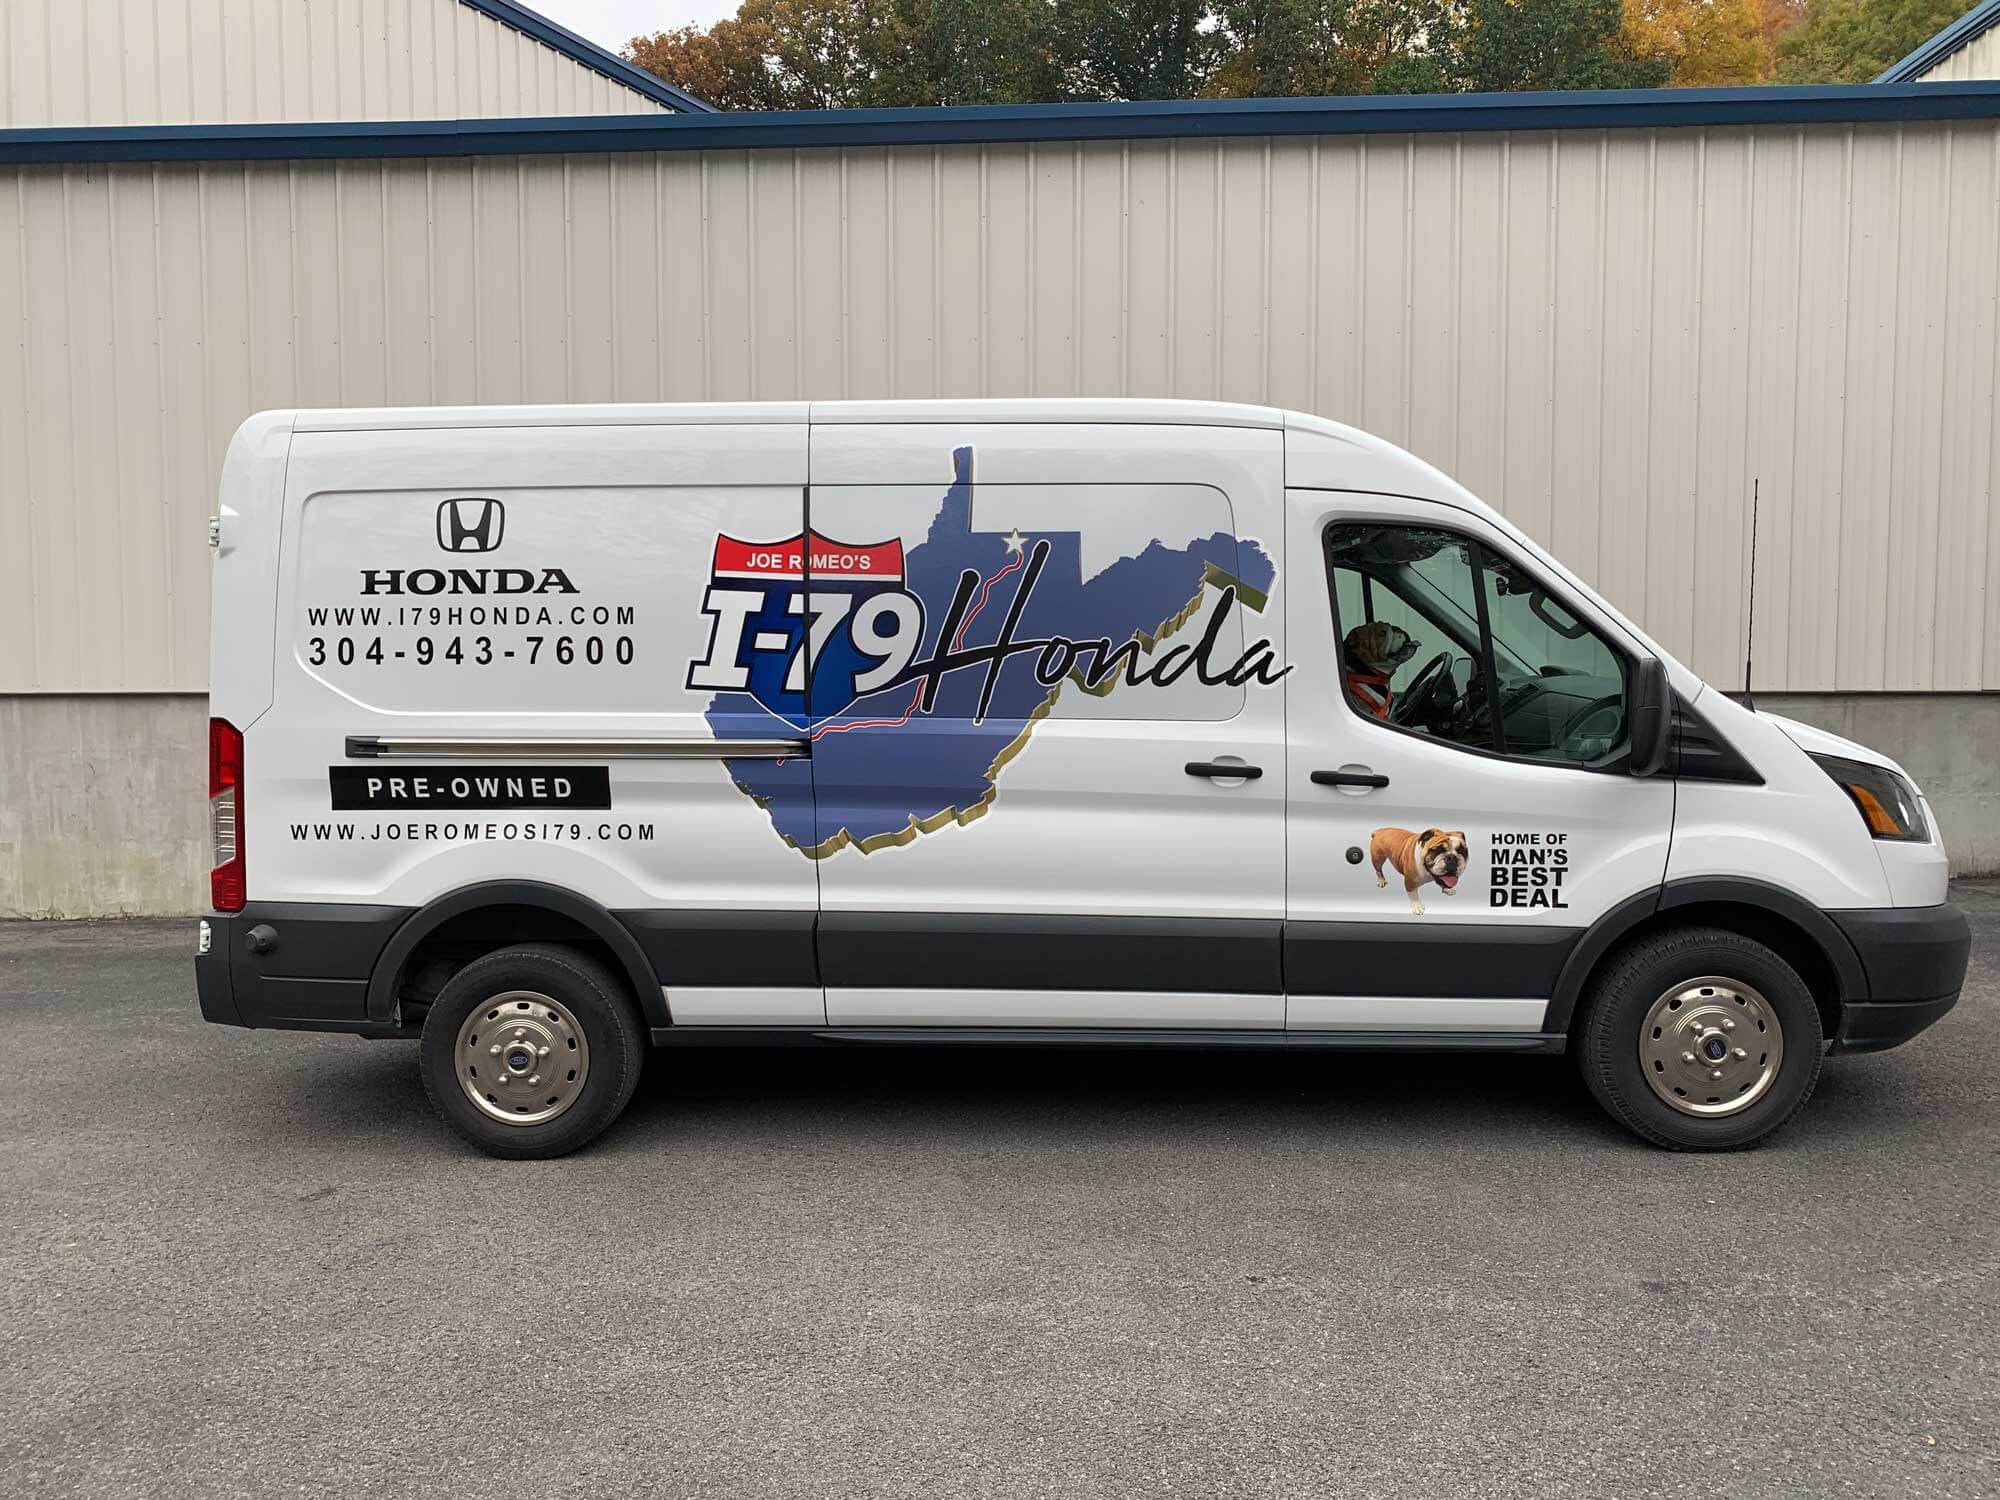 Wall & Vehicle Wraps | MPB Print & Sign Superstore